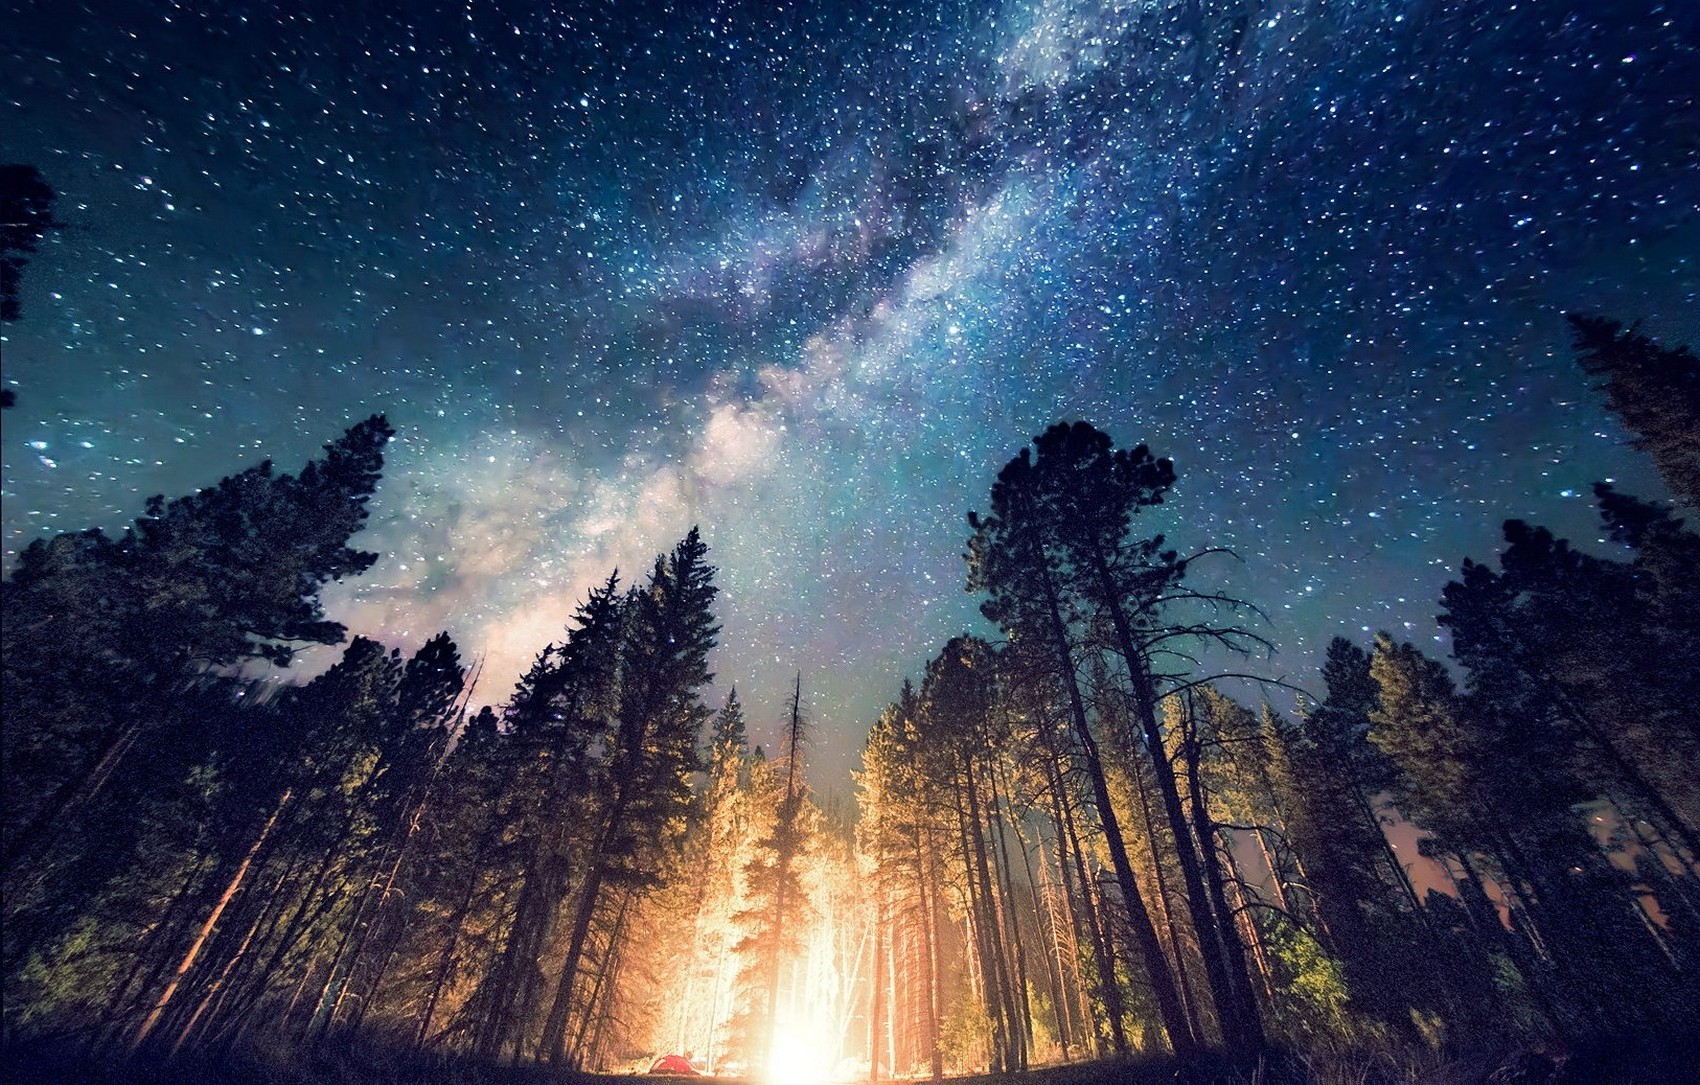 long Exposure, Starry Night, Milky Way, Galaxy, Nature, Camping, Forest, Landscape, New Mexico, Lights, Trees Wallpaper